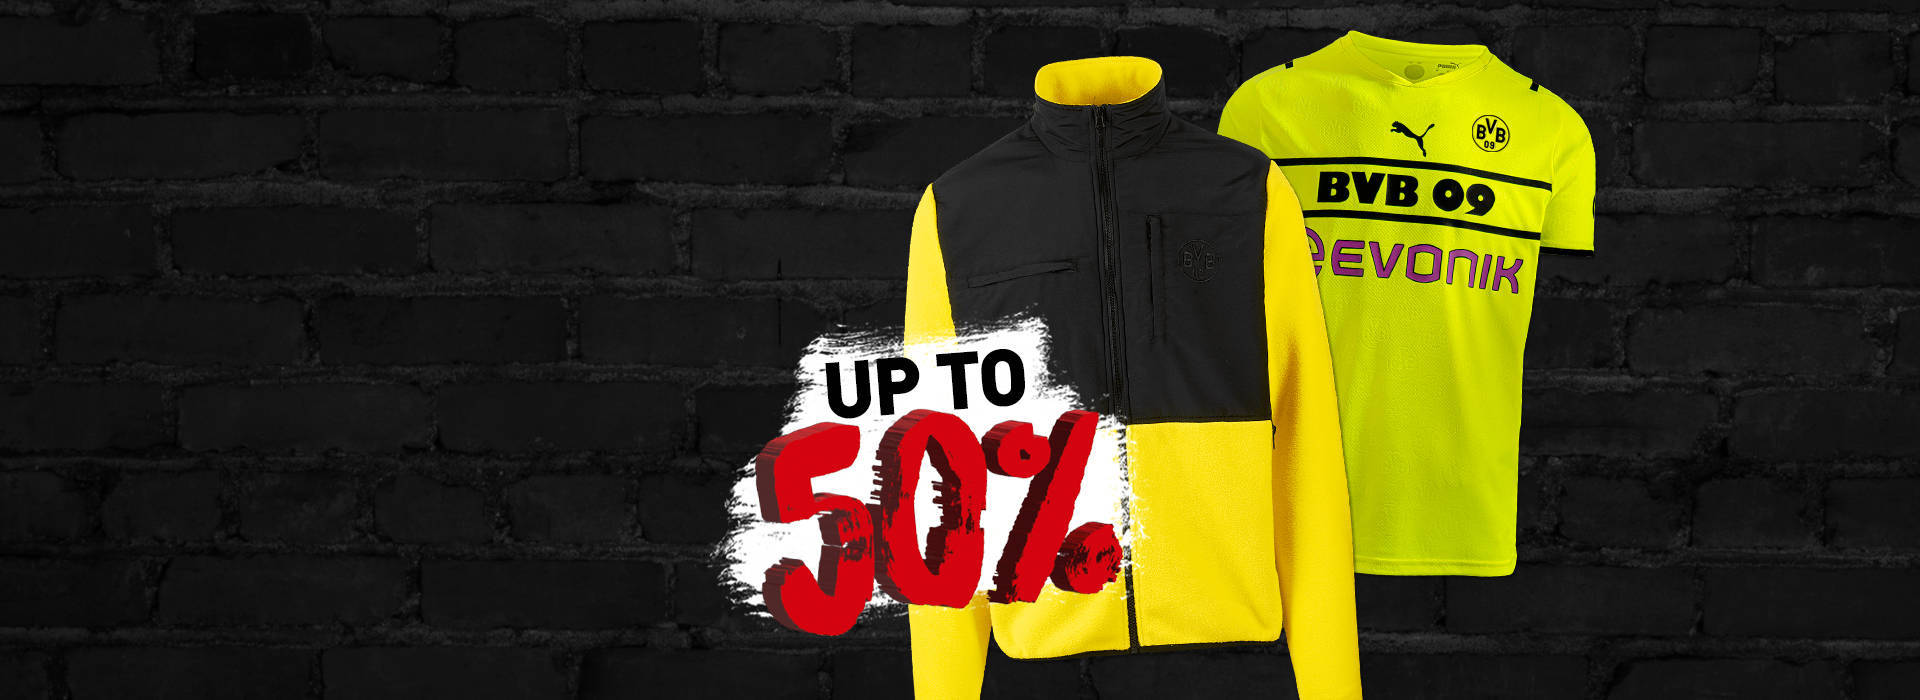  Winter Sale at BVB: Don´t